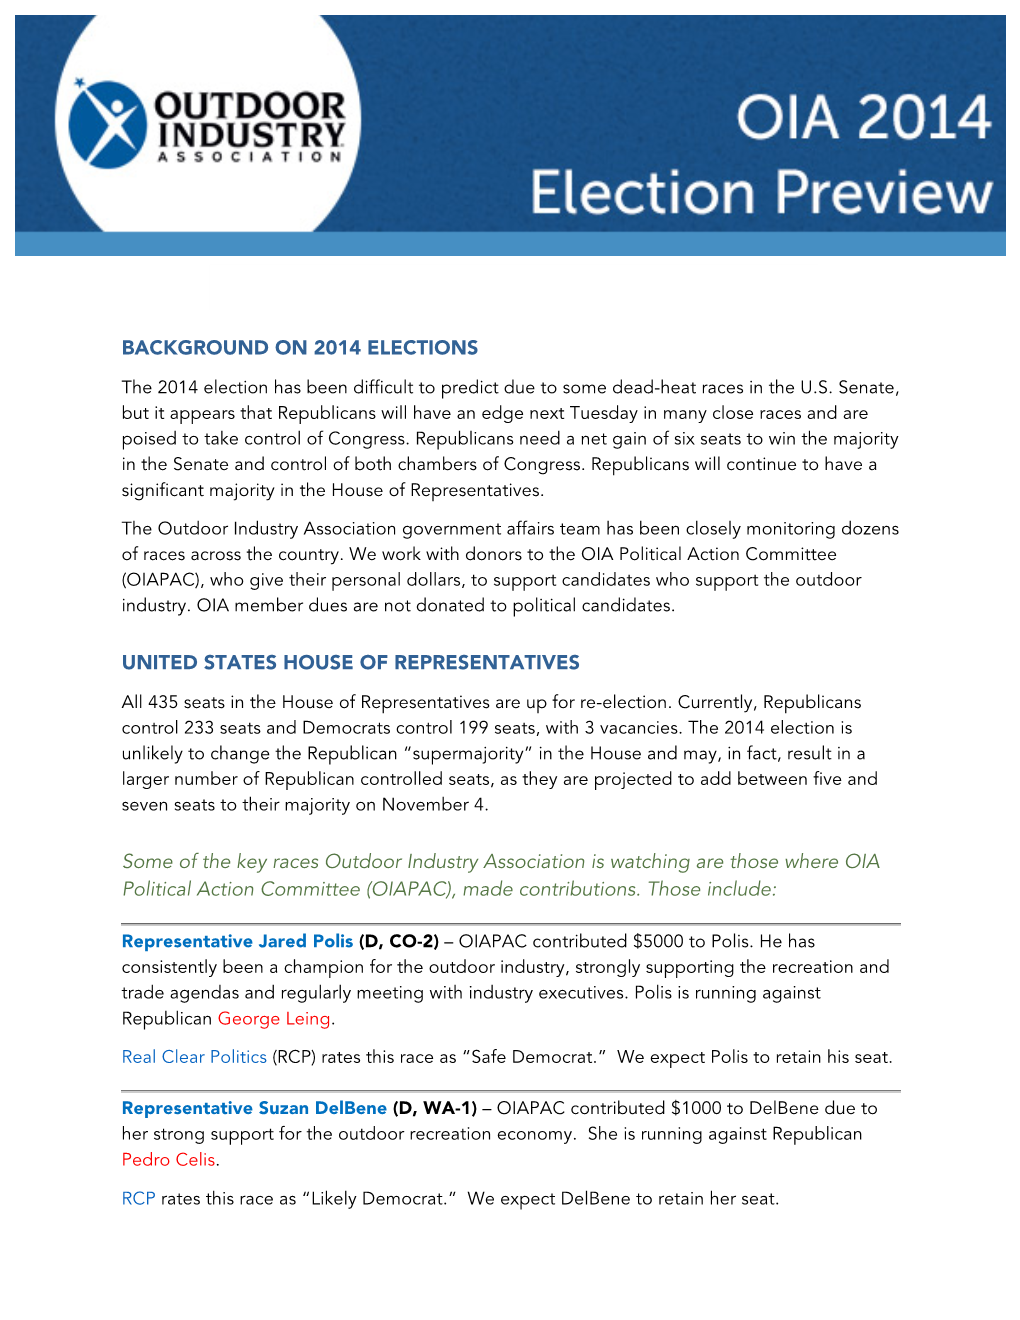 Outdoor Industry Association 2014 Election Preview